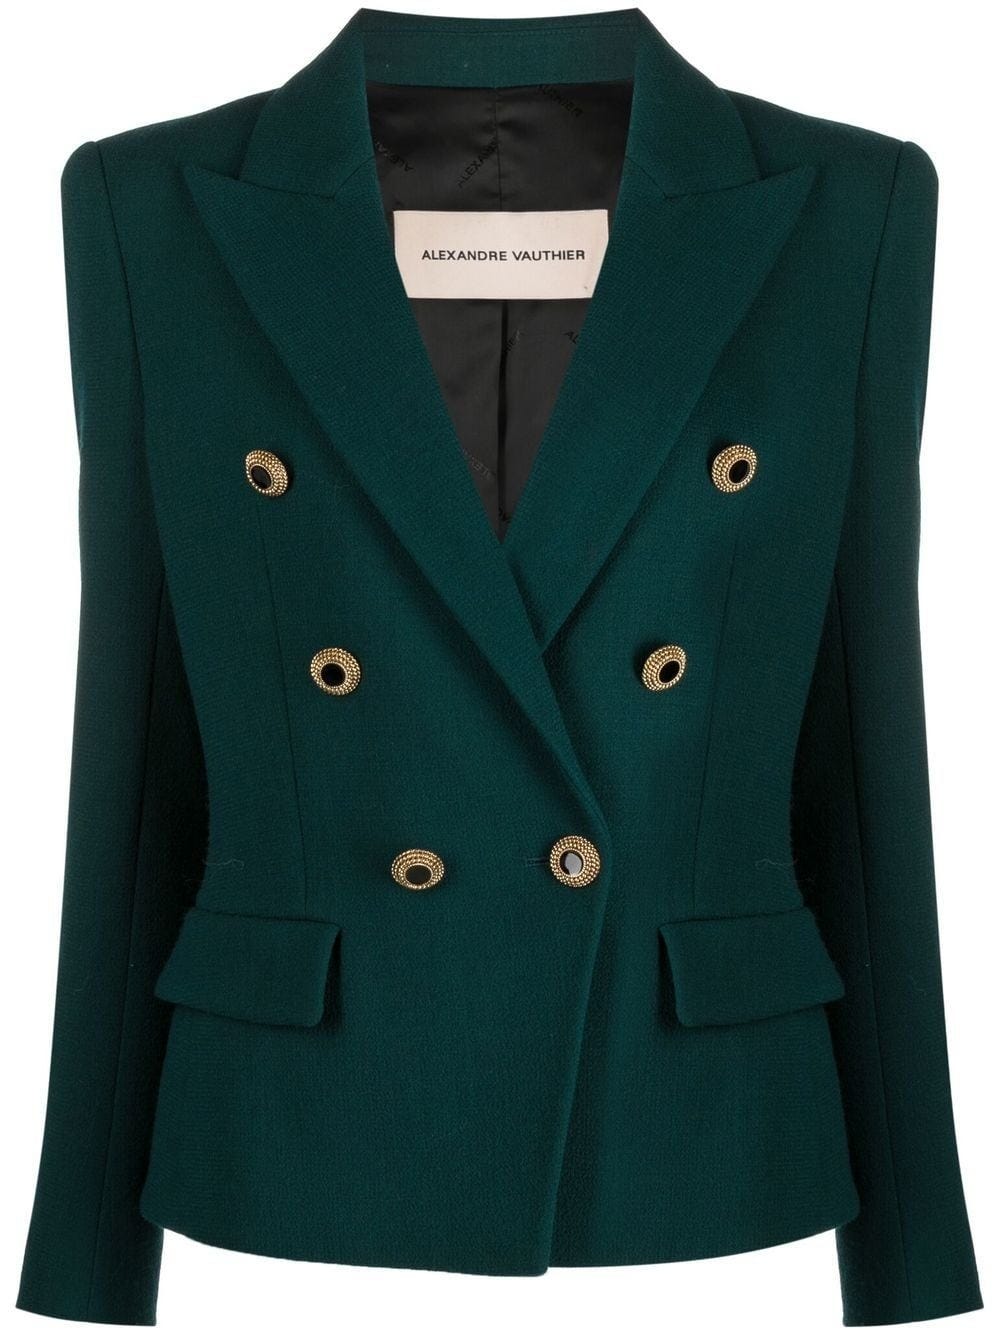 ALEXANDRE VAUTHIER GREEN DOUBLE-BREASTED TWEED BLAZER WITH JEWELED BUTTONS